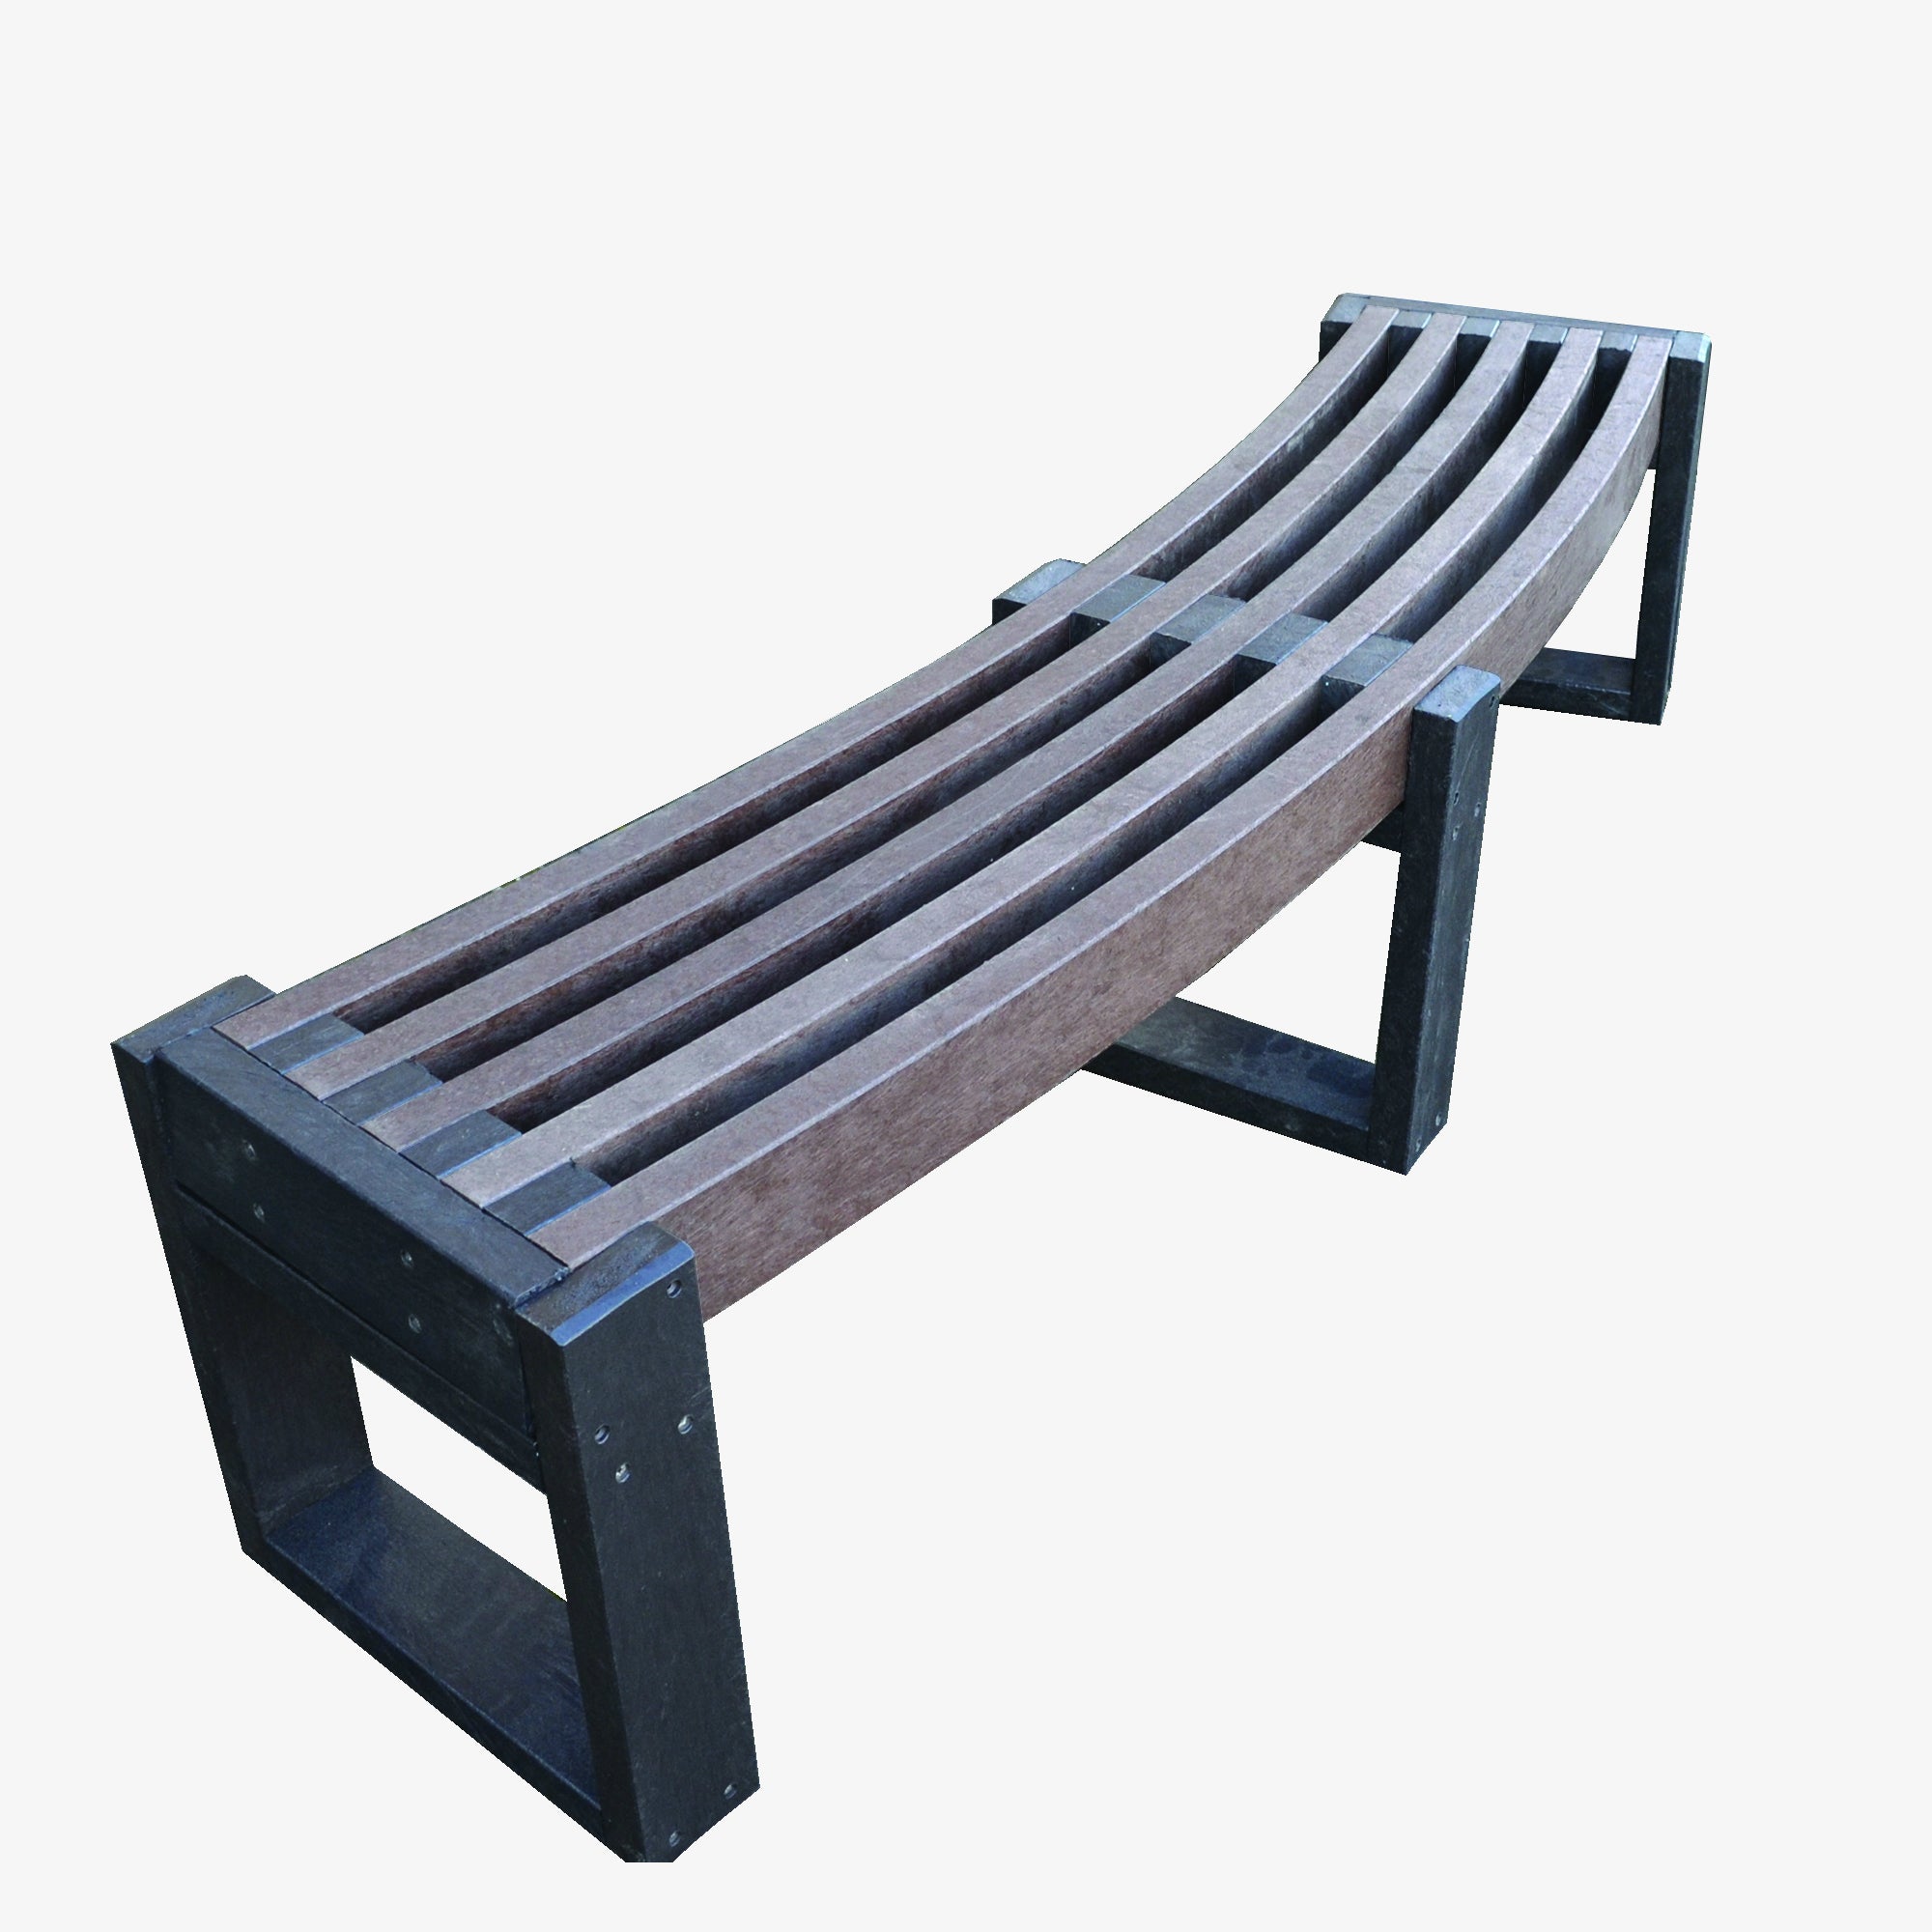 Manticore Lumber curved black & brown recycled plastic bench